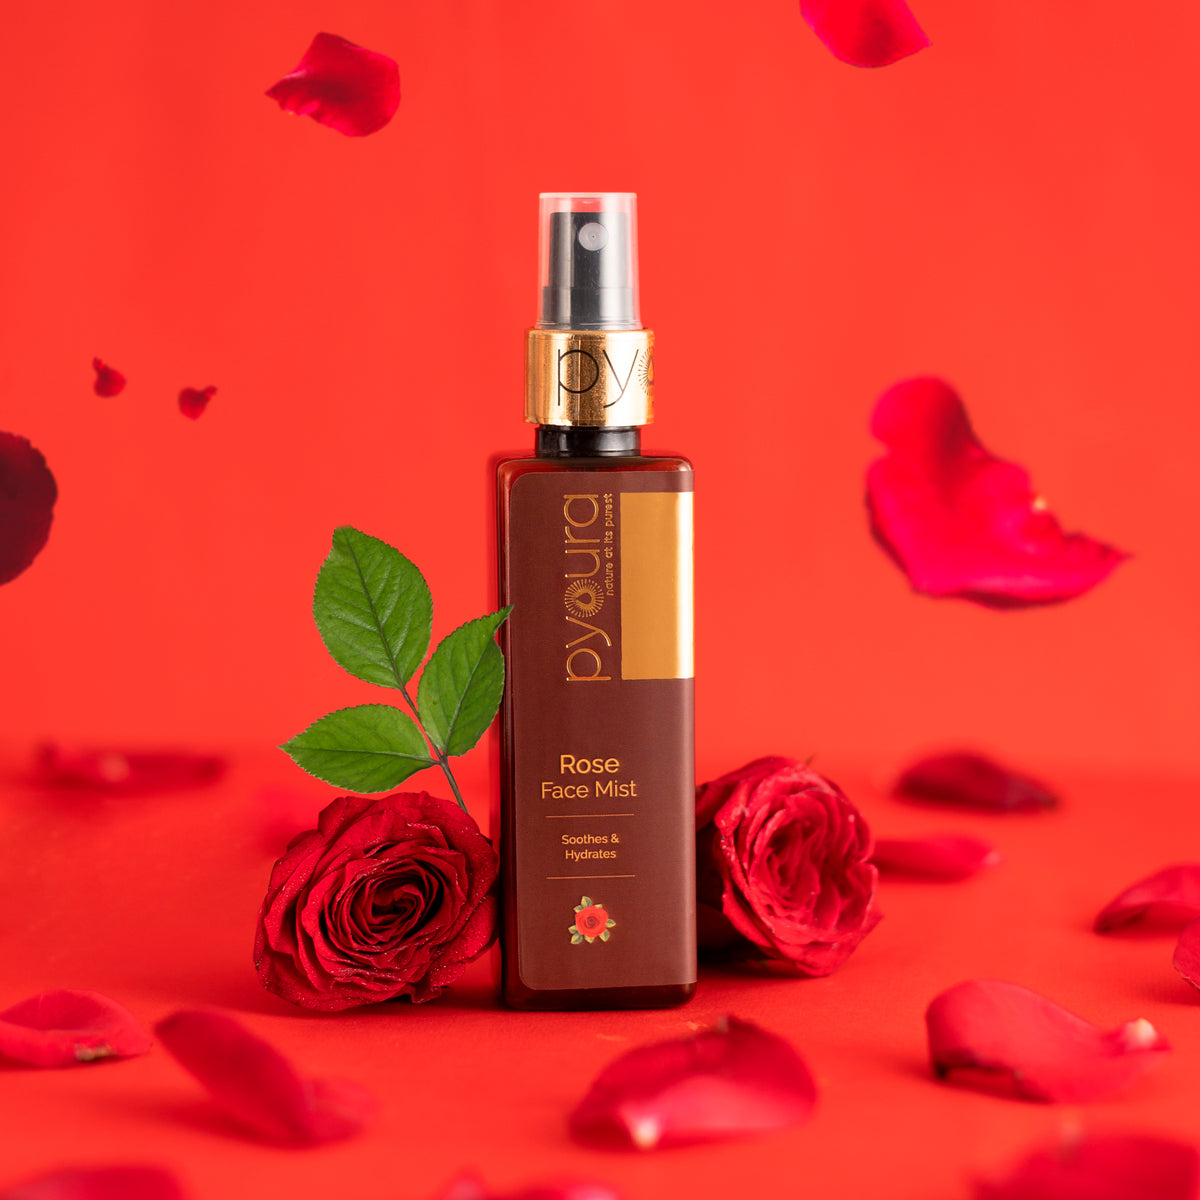 Rose + Aloe vera + Khus Face Mist Summer Skincare Kit <h4> Soothe Hydrate Sunburn & Refresh with these 100% pure, alcohol free extracts<h4><h6>100 ml each Pack of 3<h6>